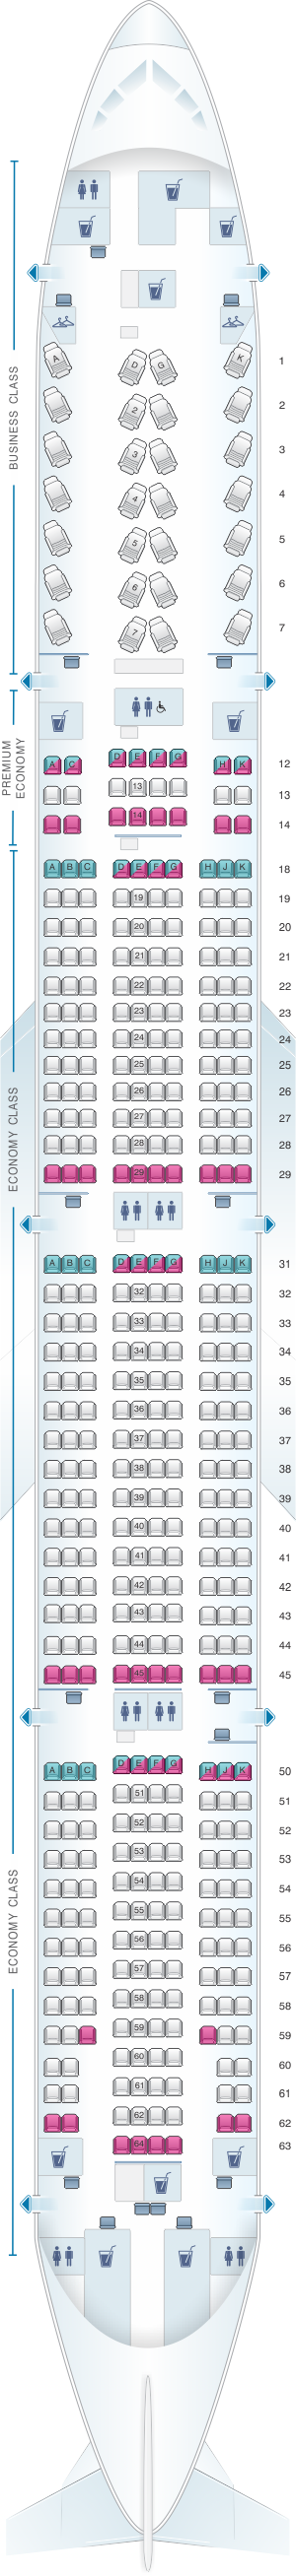 Seat map for Air Canada Boeing B777 300ER (77W) International Layout 2